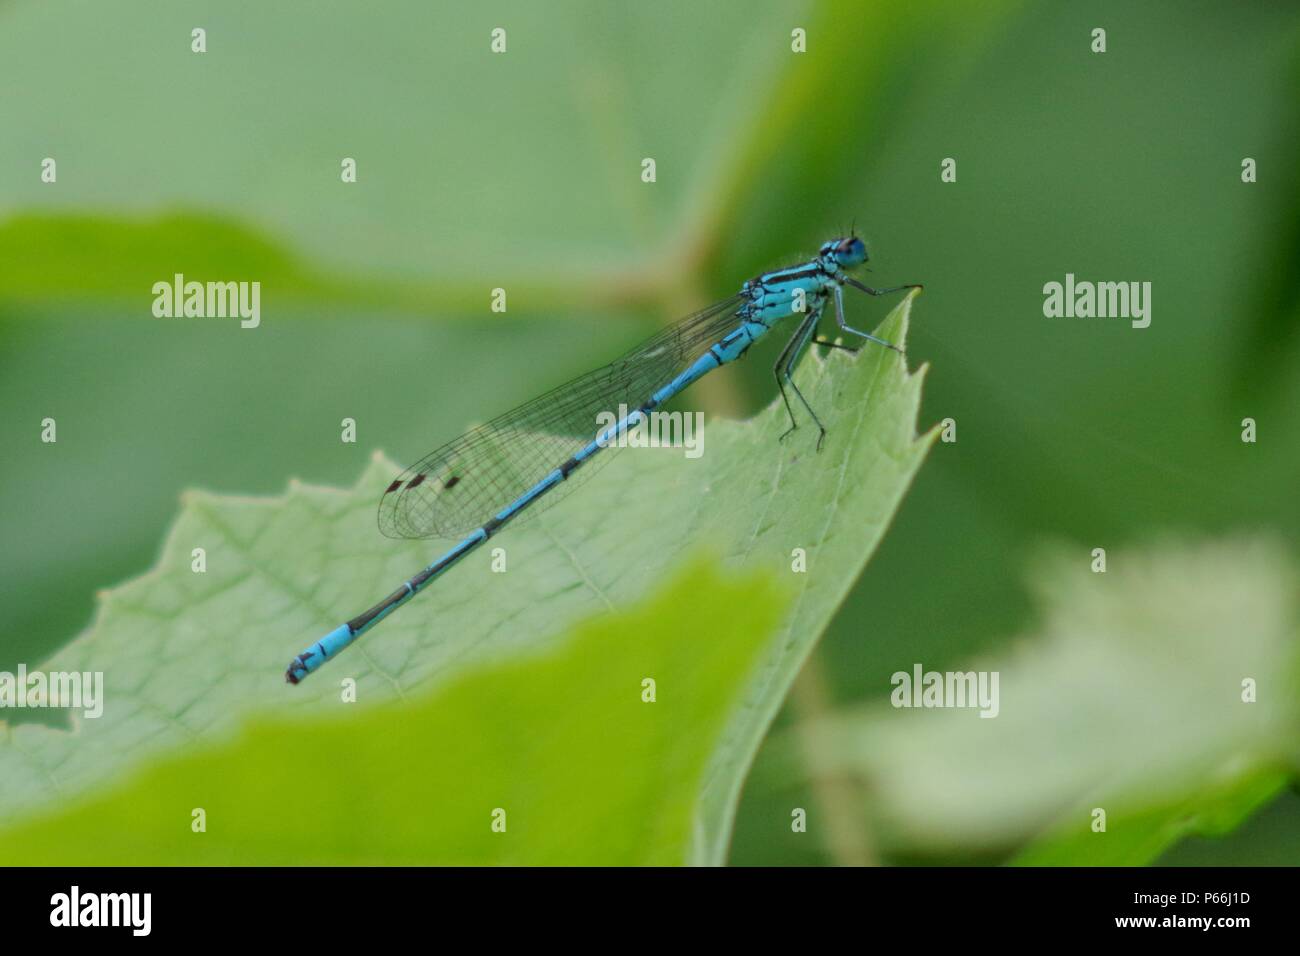 Blue dragonfly Stock Photo